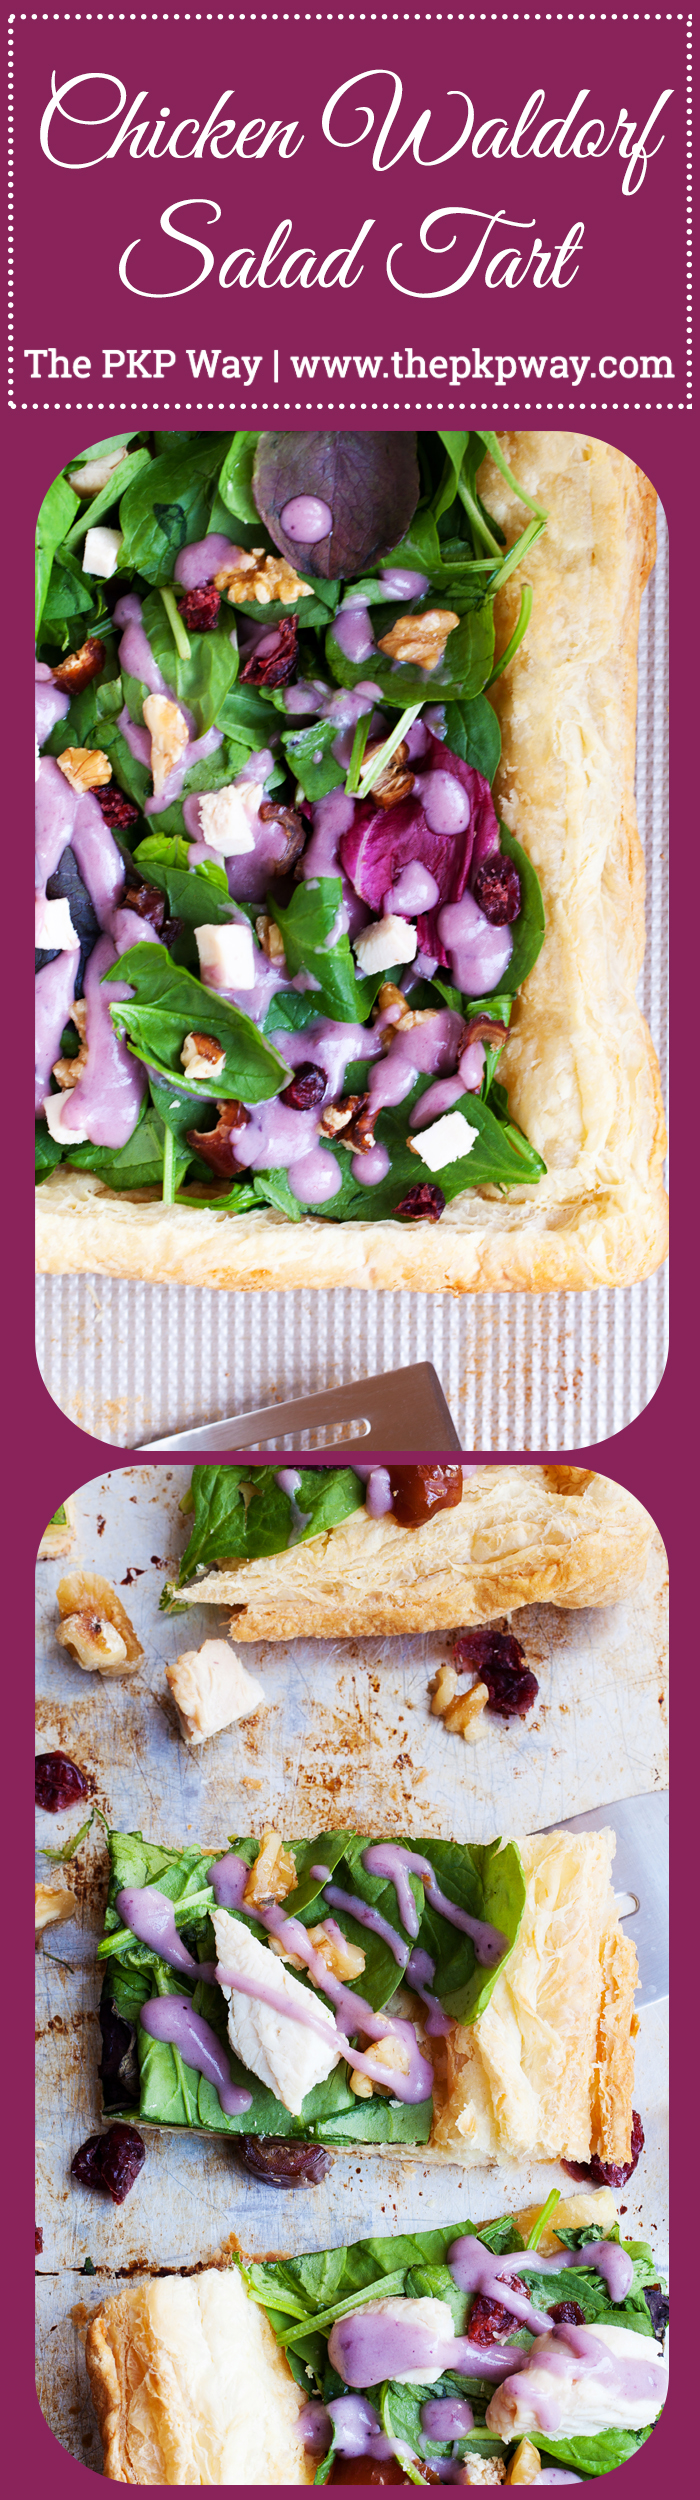 Puff pastry topped with fresh greens and a drizzle of blueberry lemon dressing make this Chicken Waldorf Salad Tart a delicious appetizer or light lunch option for all your holiday parties. 